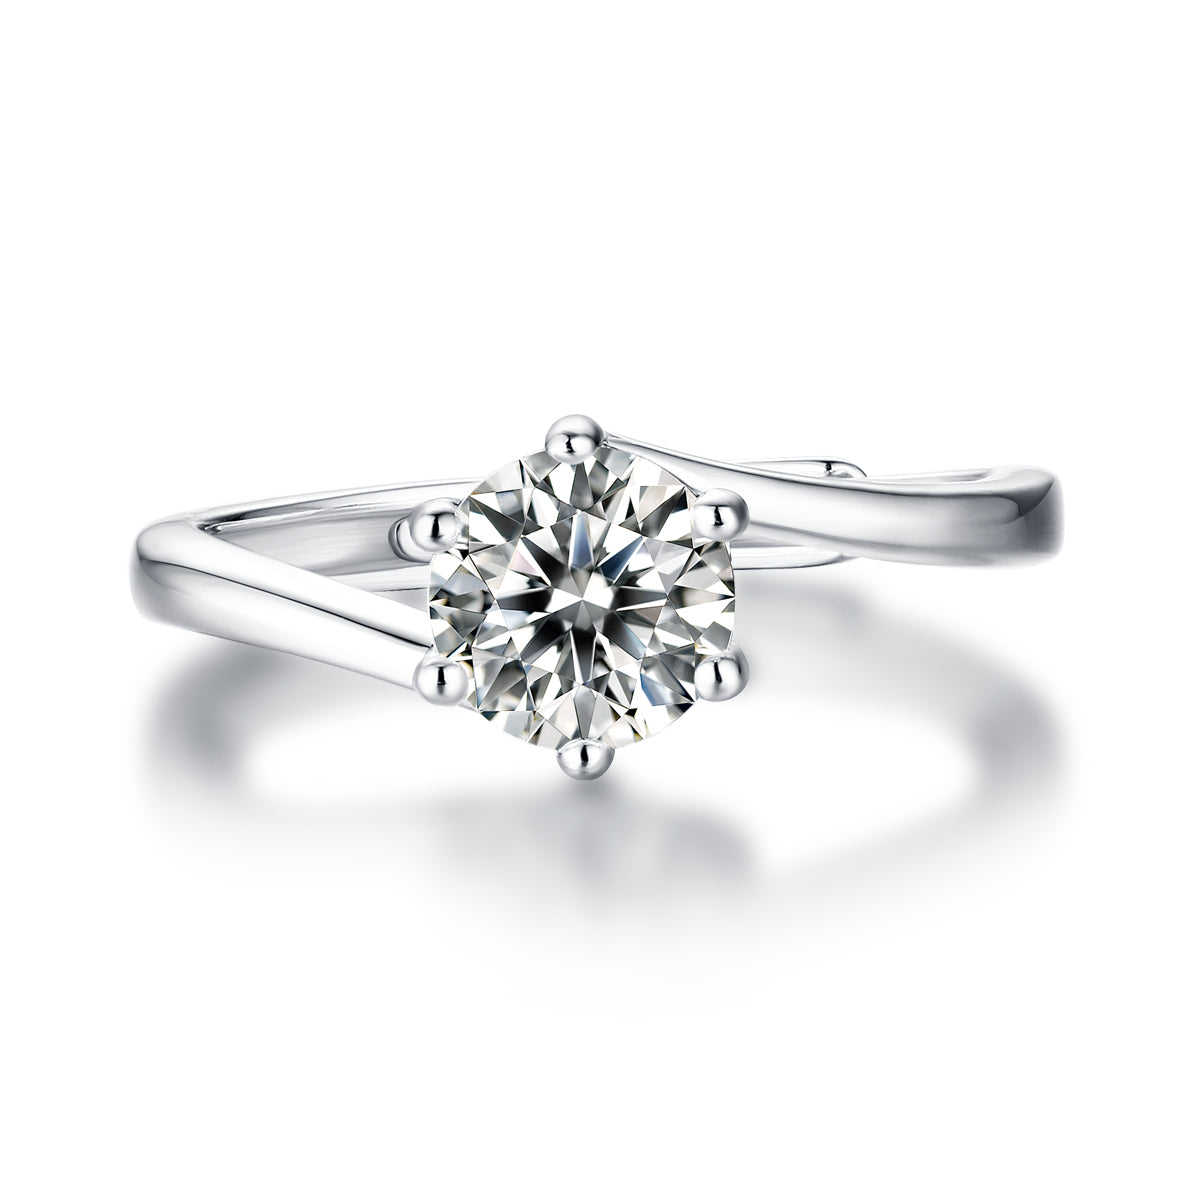 IE05332 ROUND CUT MOISSANITE ENGANGEMENT RING IN STERLING SILVER